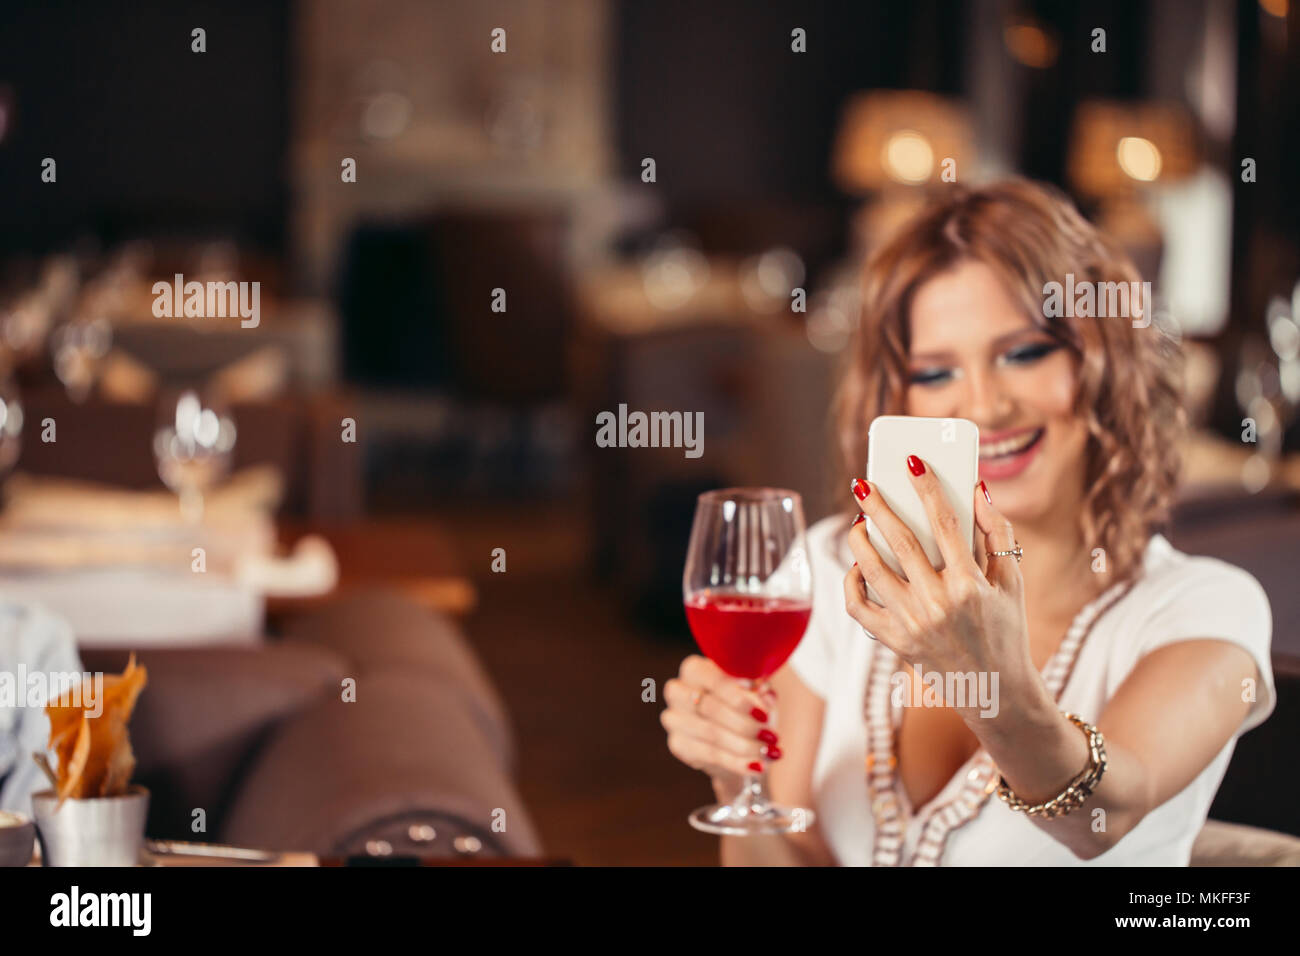 https://c8.alamy.com/comp/MKFF3F/young-happy-white-woman-with-a-glass-of-wine-taking-selfie-at-restaurant-MKFF3F.jpg